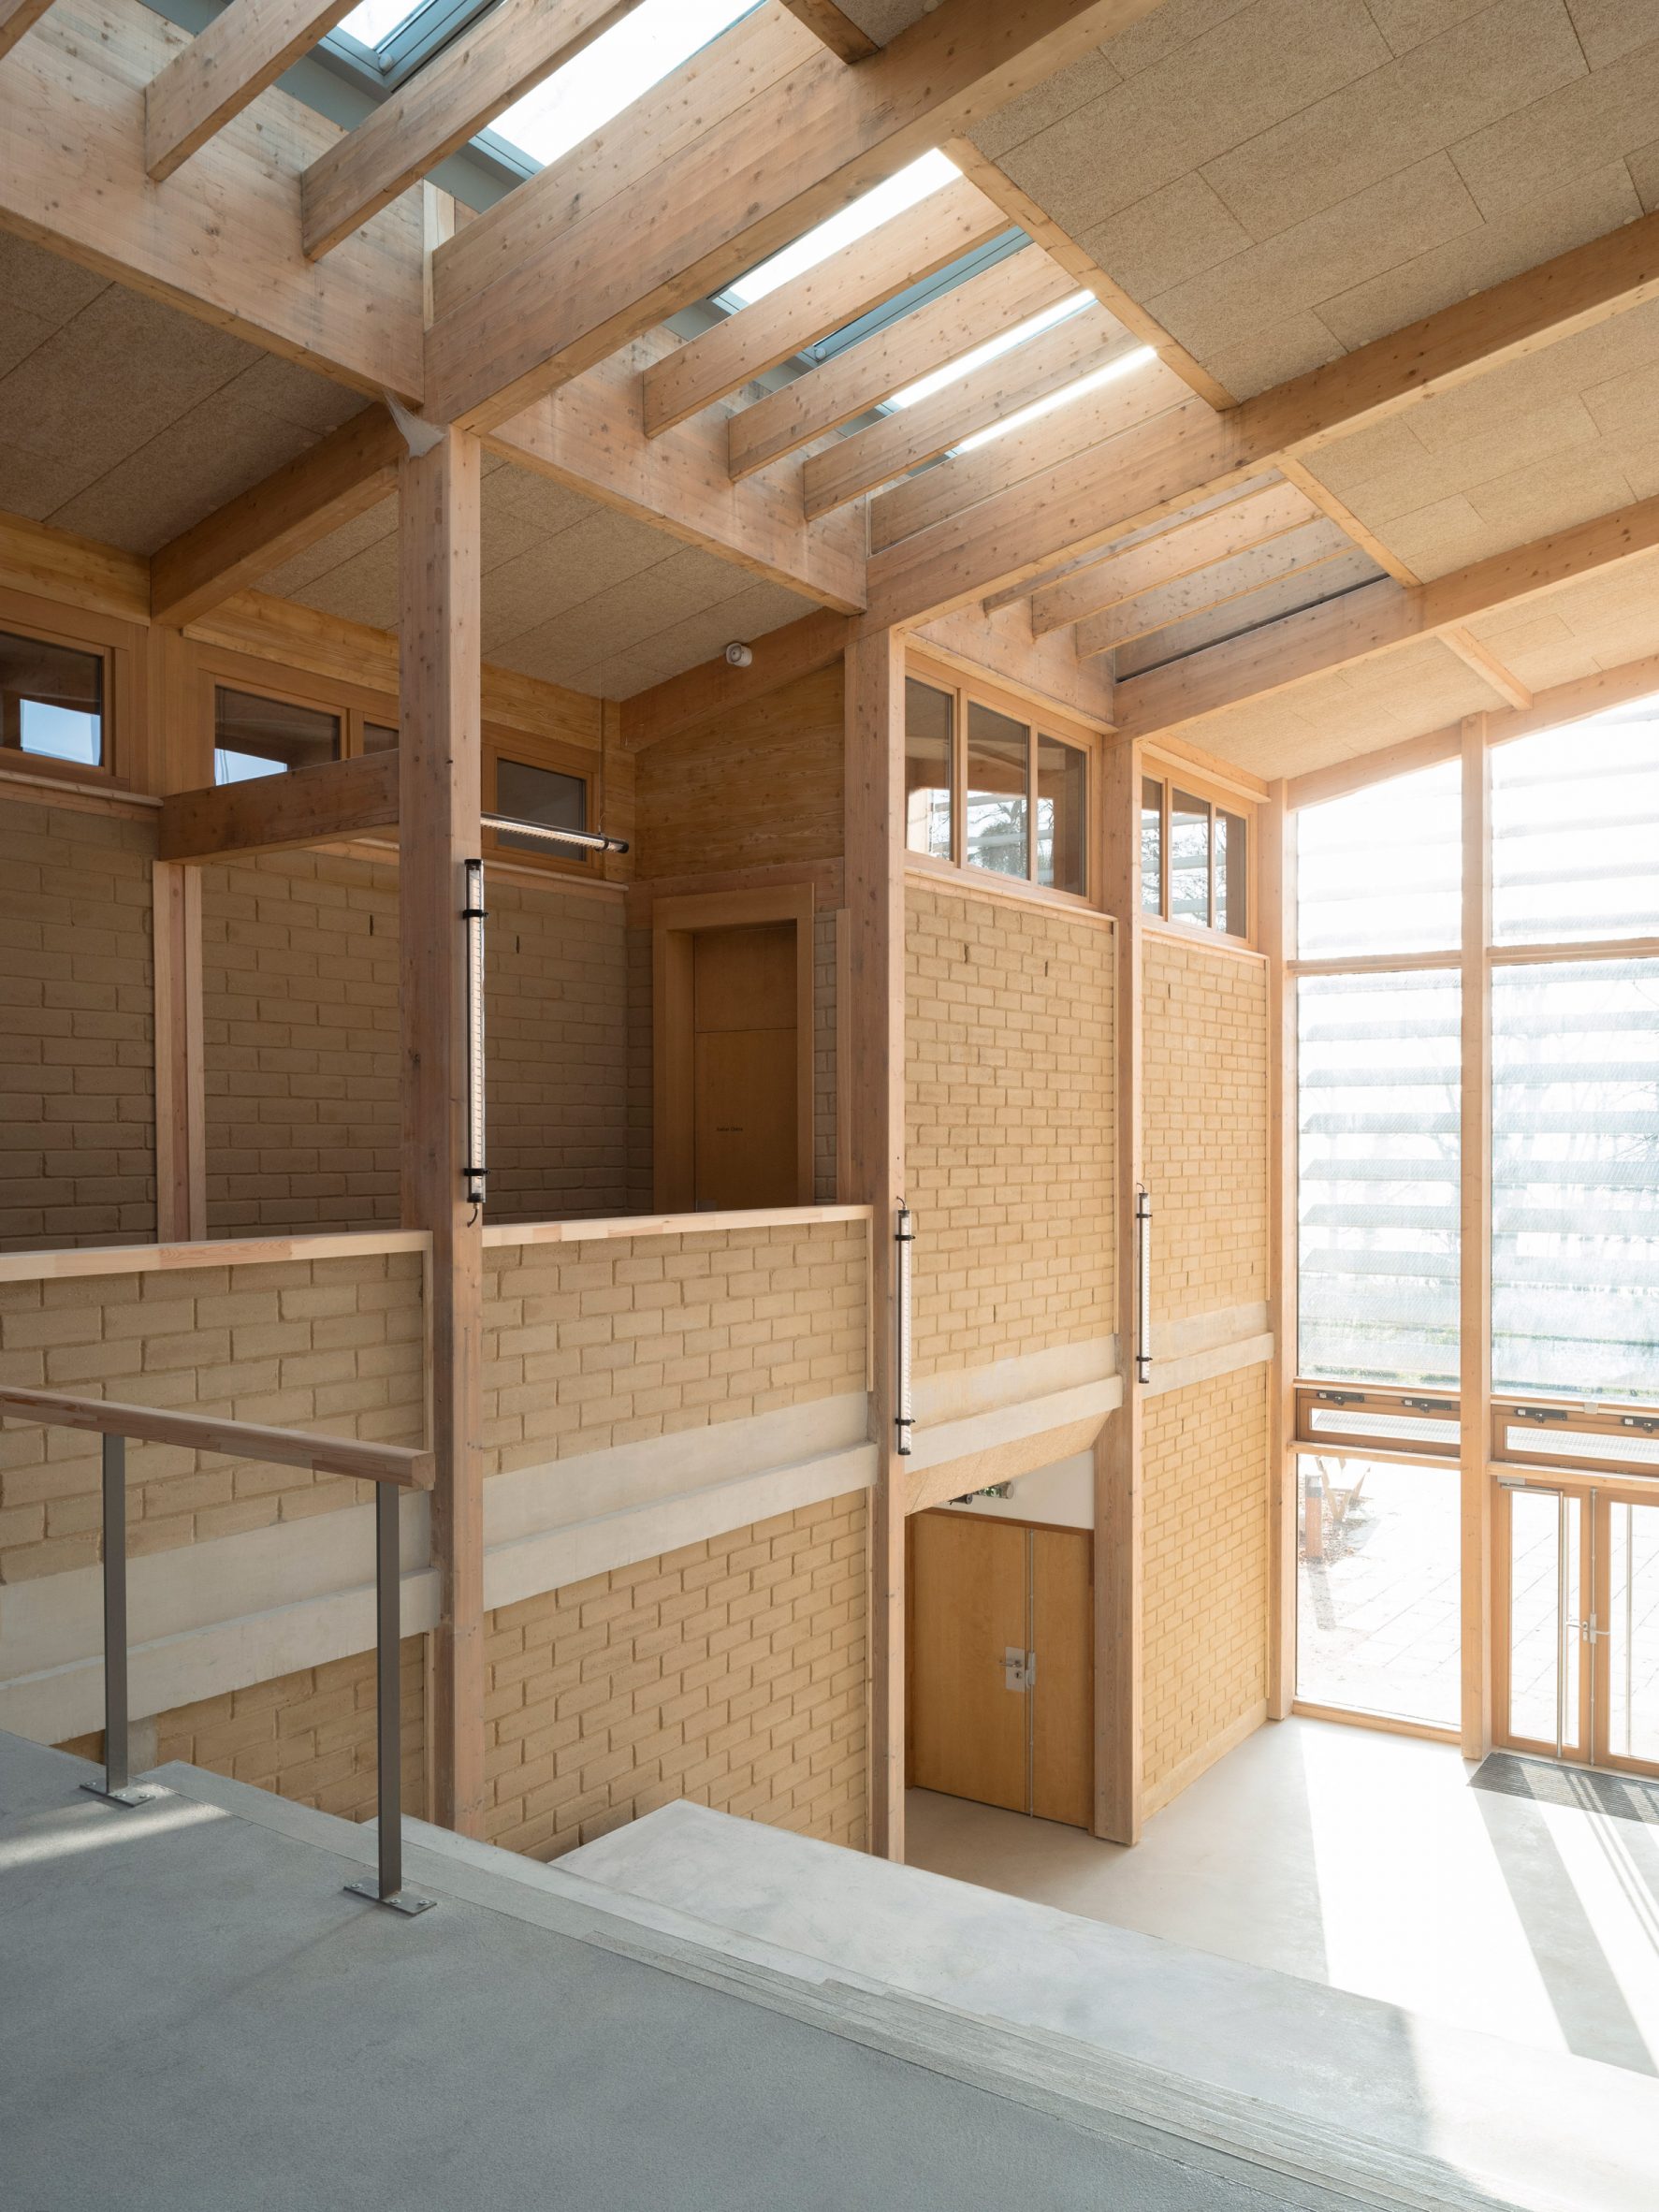 Gilbert Raby Therapeutic Workshops by Tolila+Gilliland